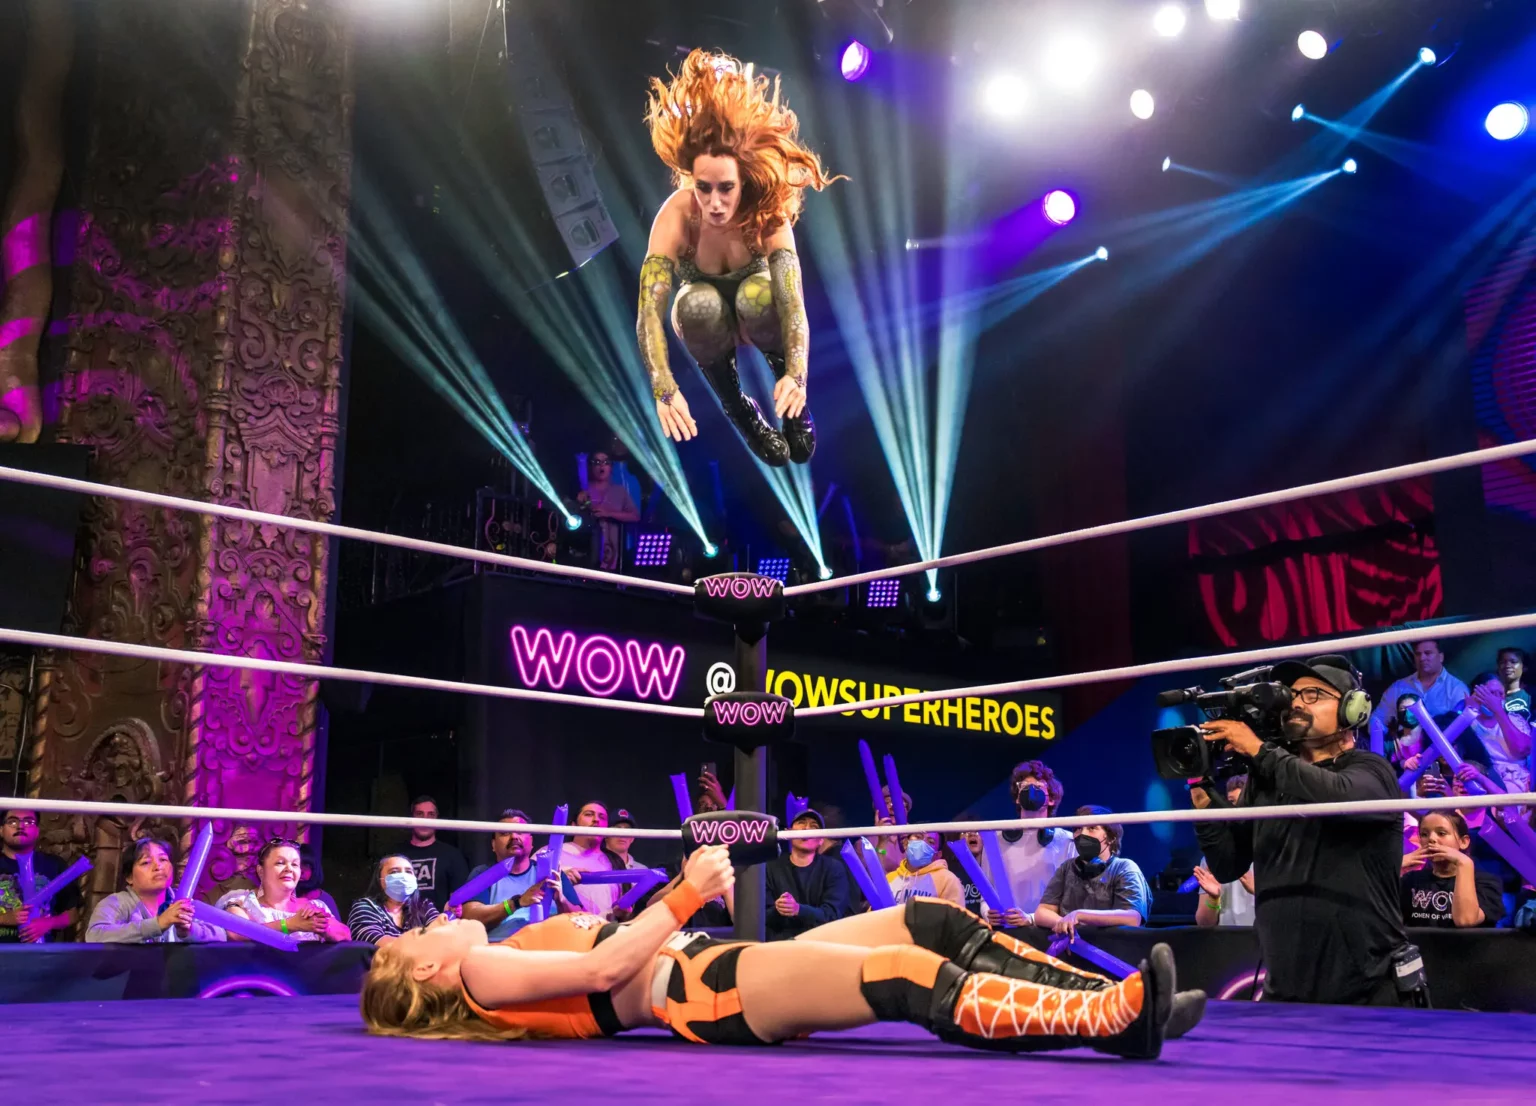 Ms. Buss saw female empowerment when she first went to a WOW show. Here, Princess Aussie jumps from the top rope onto BK Rhythm at a recent taping of WOW in Los Angeles.Credit…WOW Television Enterprises, LLC